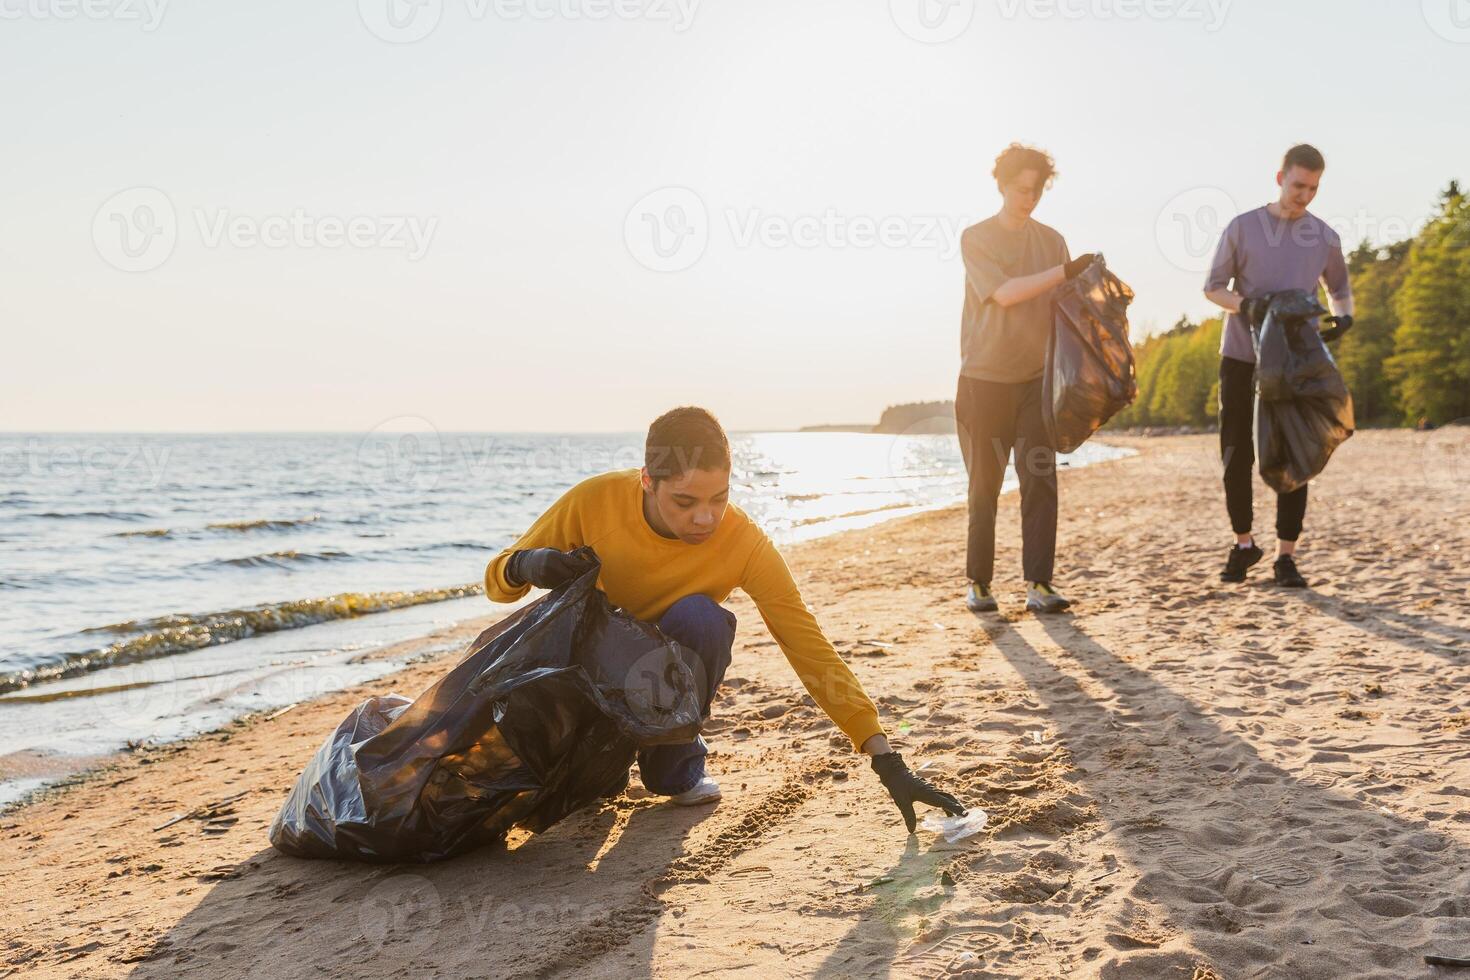 Earth day. Volunteers activists team collects garbage cleaning of beach coastal zone. Woman mans puts plastic trash in garbage bag on ocean shore. Environmental conservation coastal zone cleaning photo